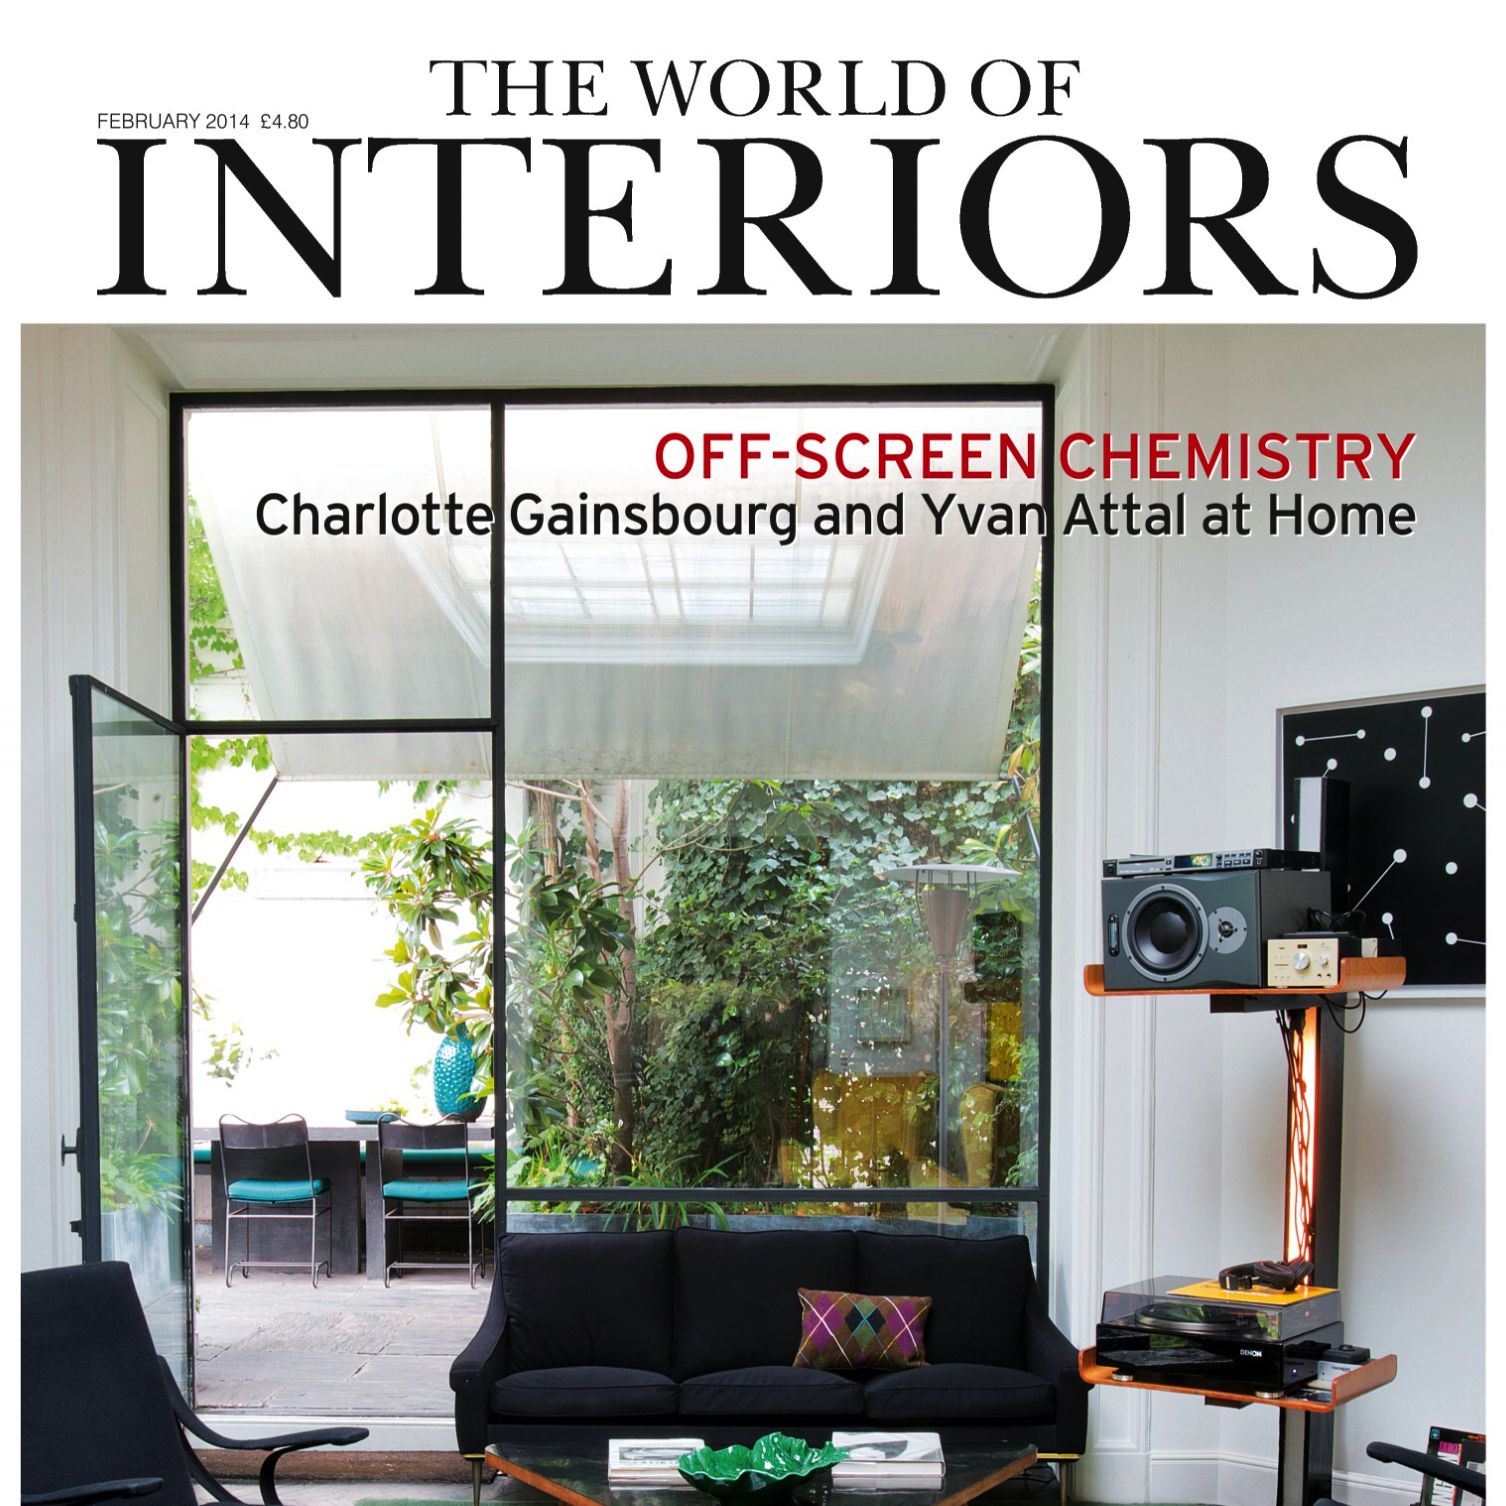 World of Interiors feature on Smartphone cables